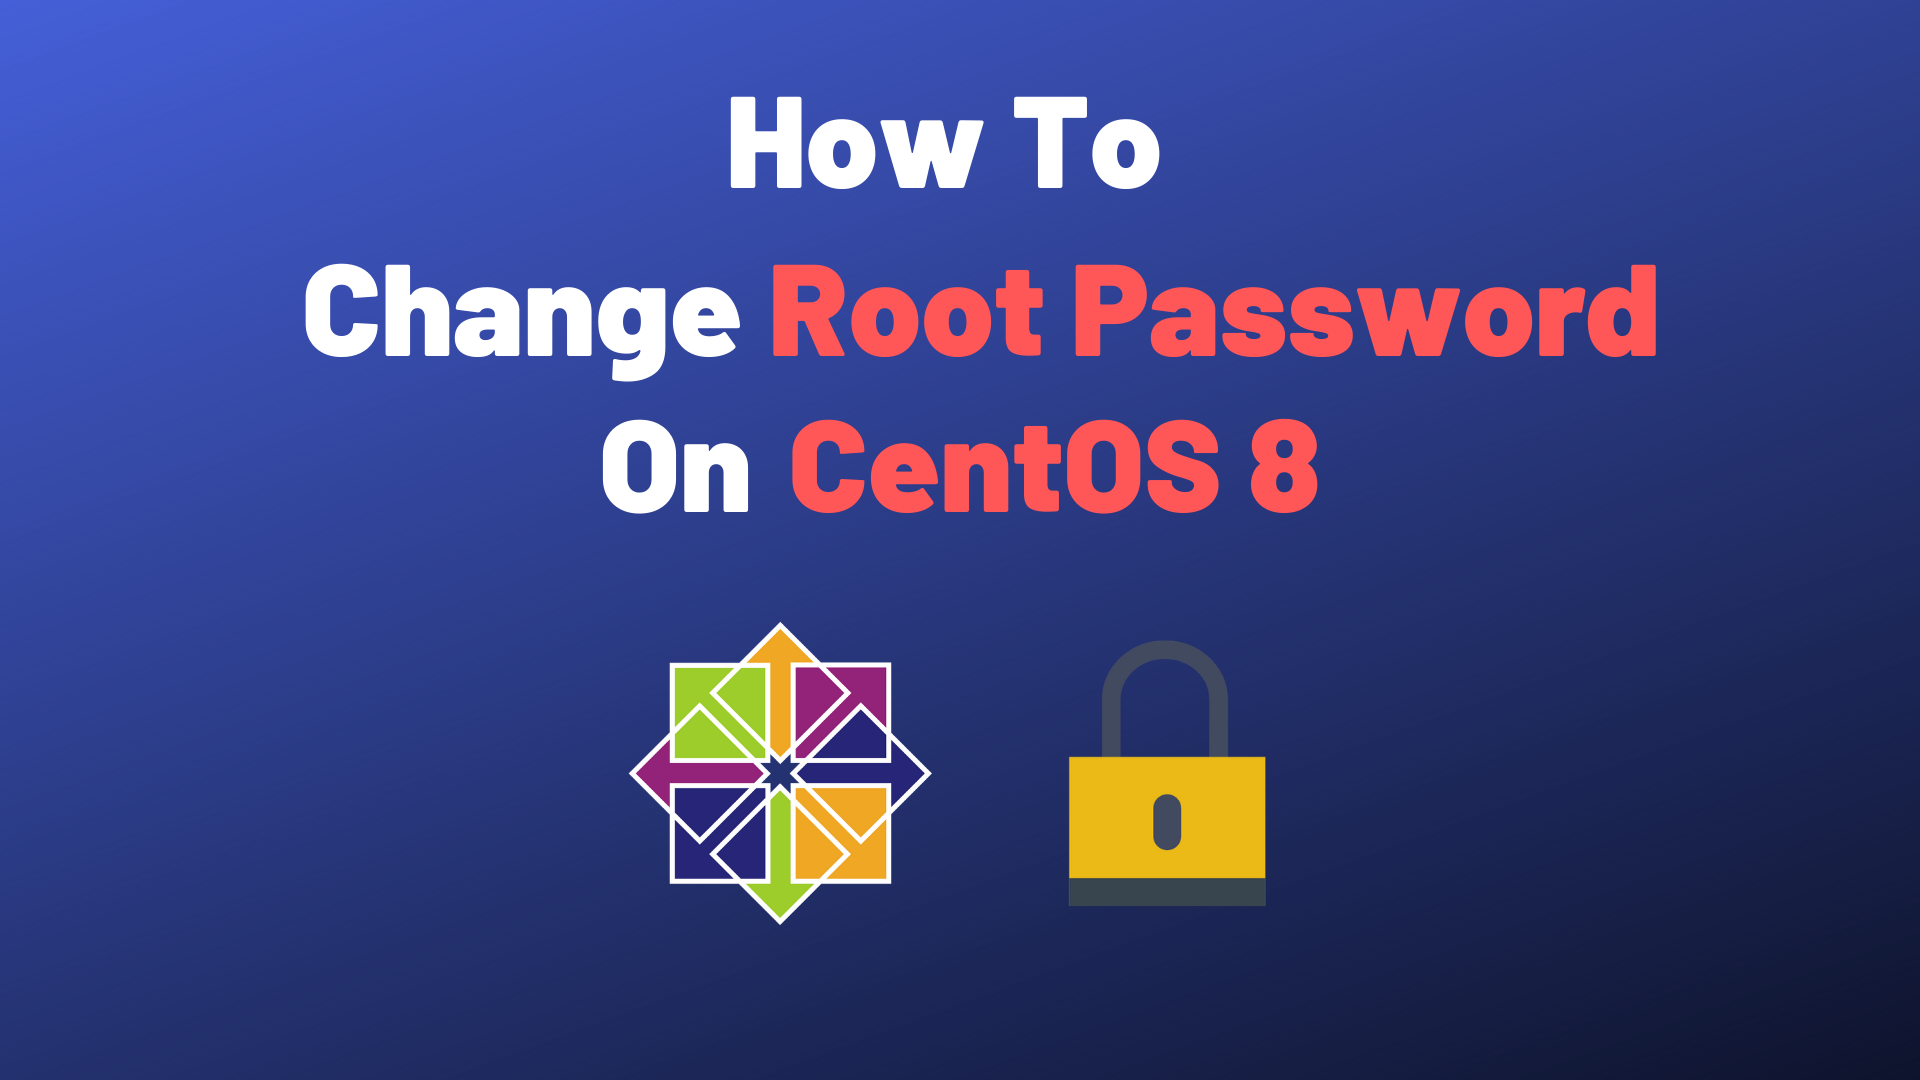 How To Change Root Password on CentOS 8